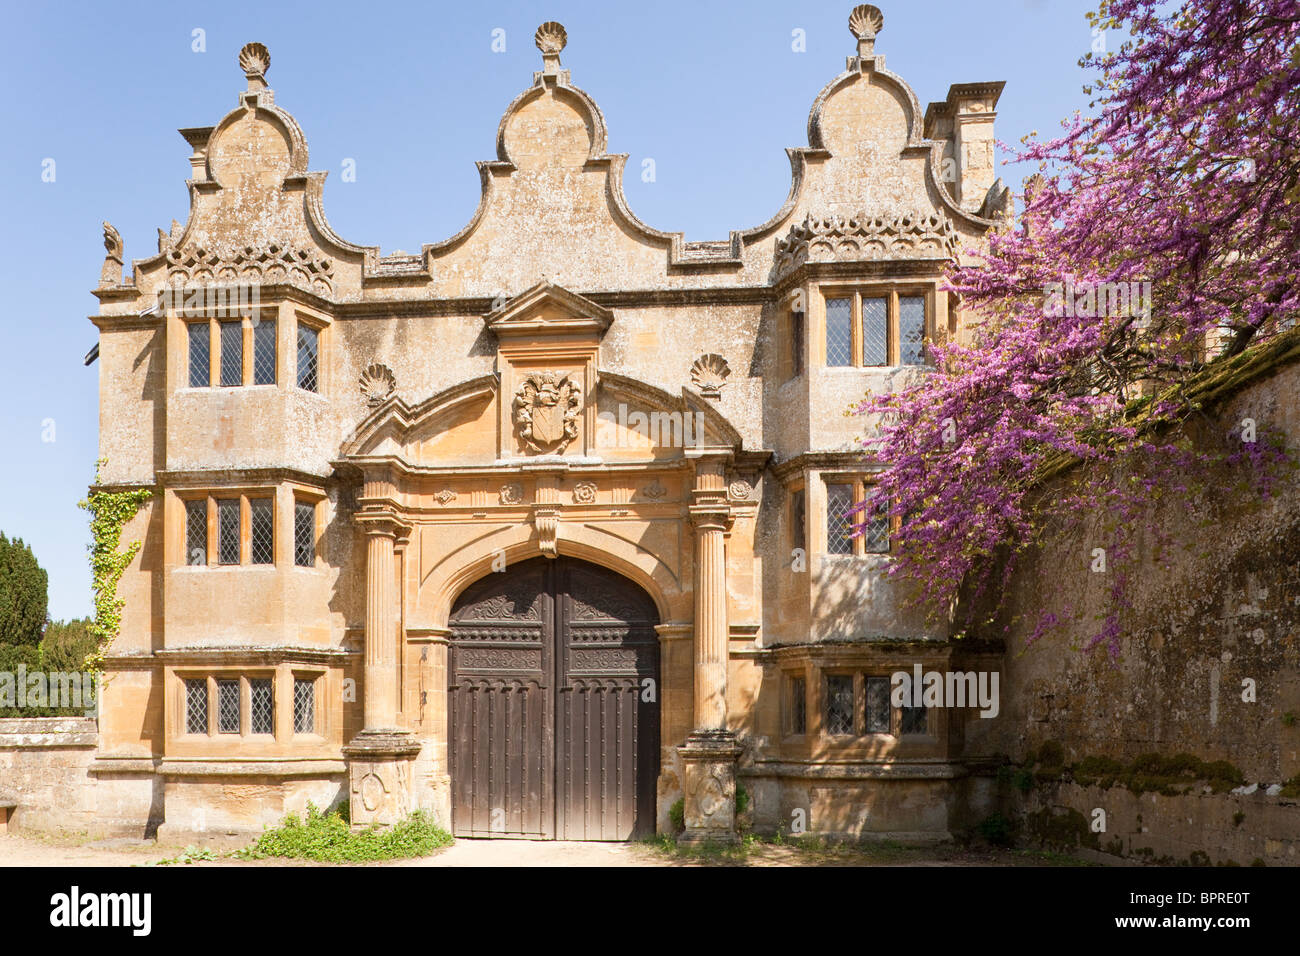 La Jacobiana Cotswold stone gatehouse a Stanway House, Stanway, Gloucestershire Foto Stock